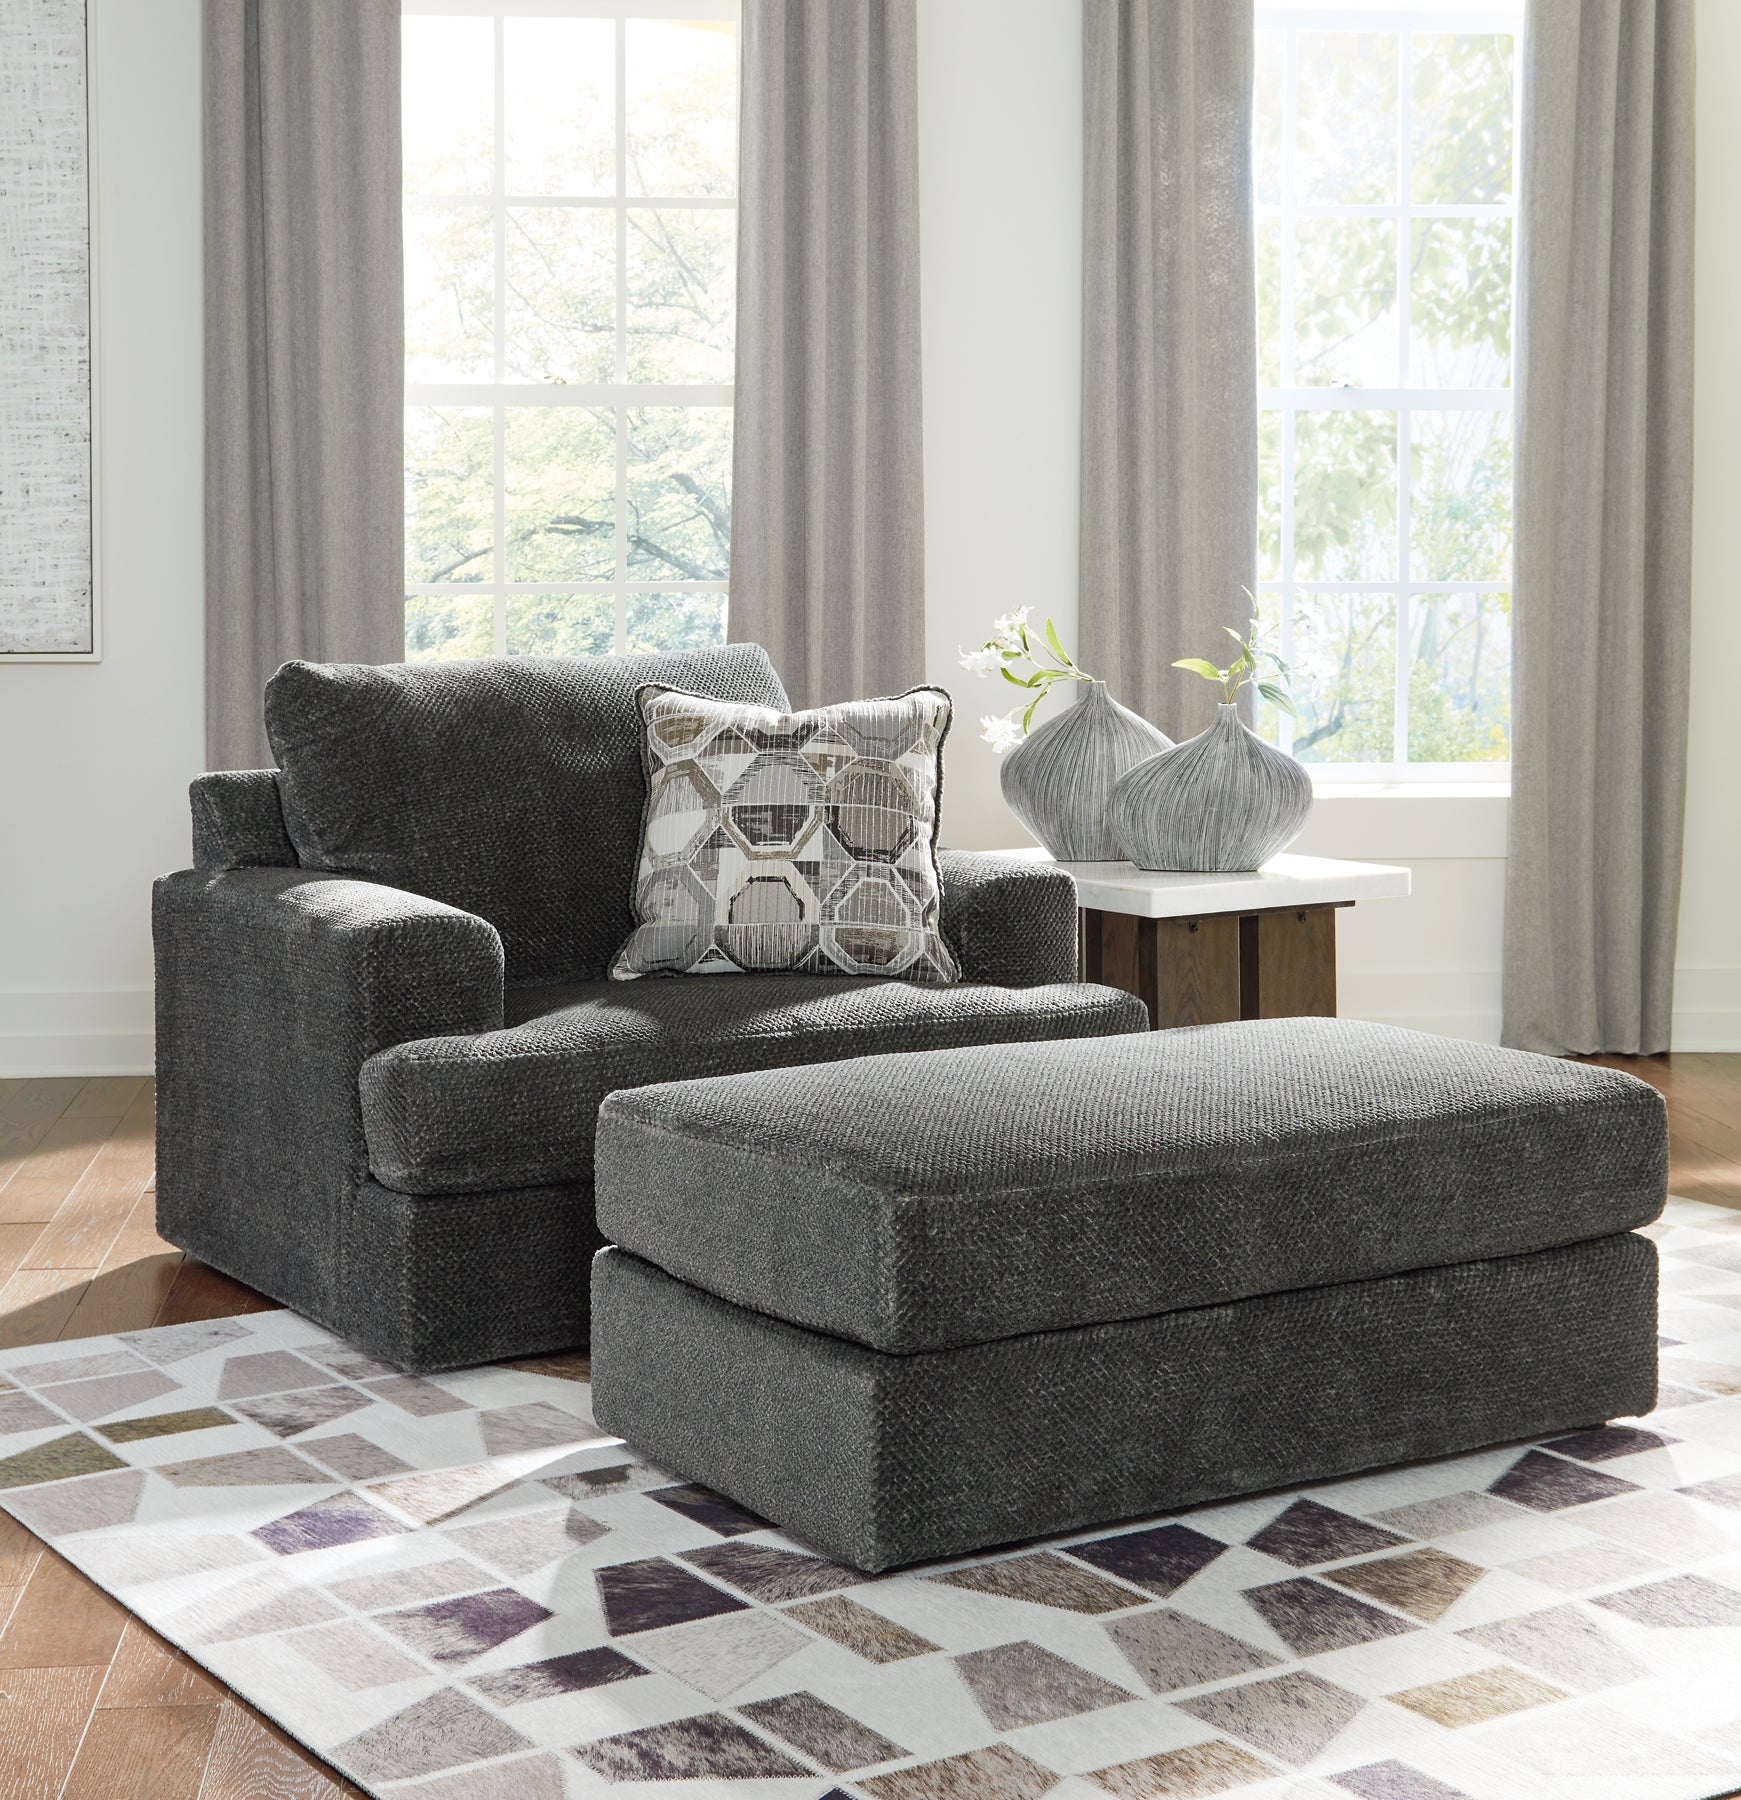 Karinne Sofa, Loveseat, Chair and Ottoman Signature Design by Ashley®